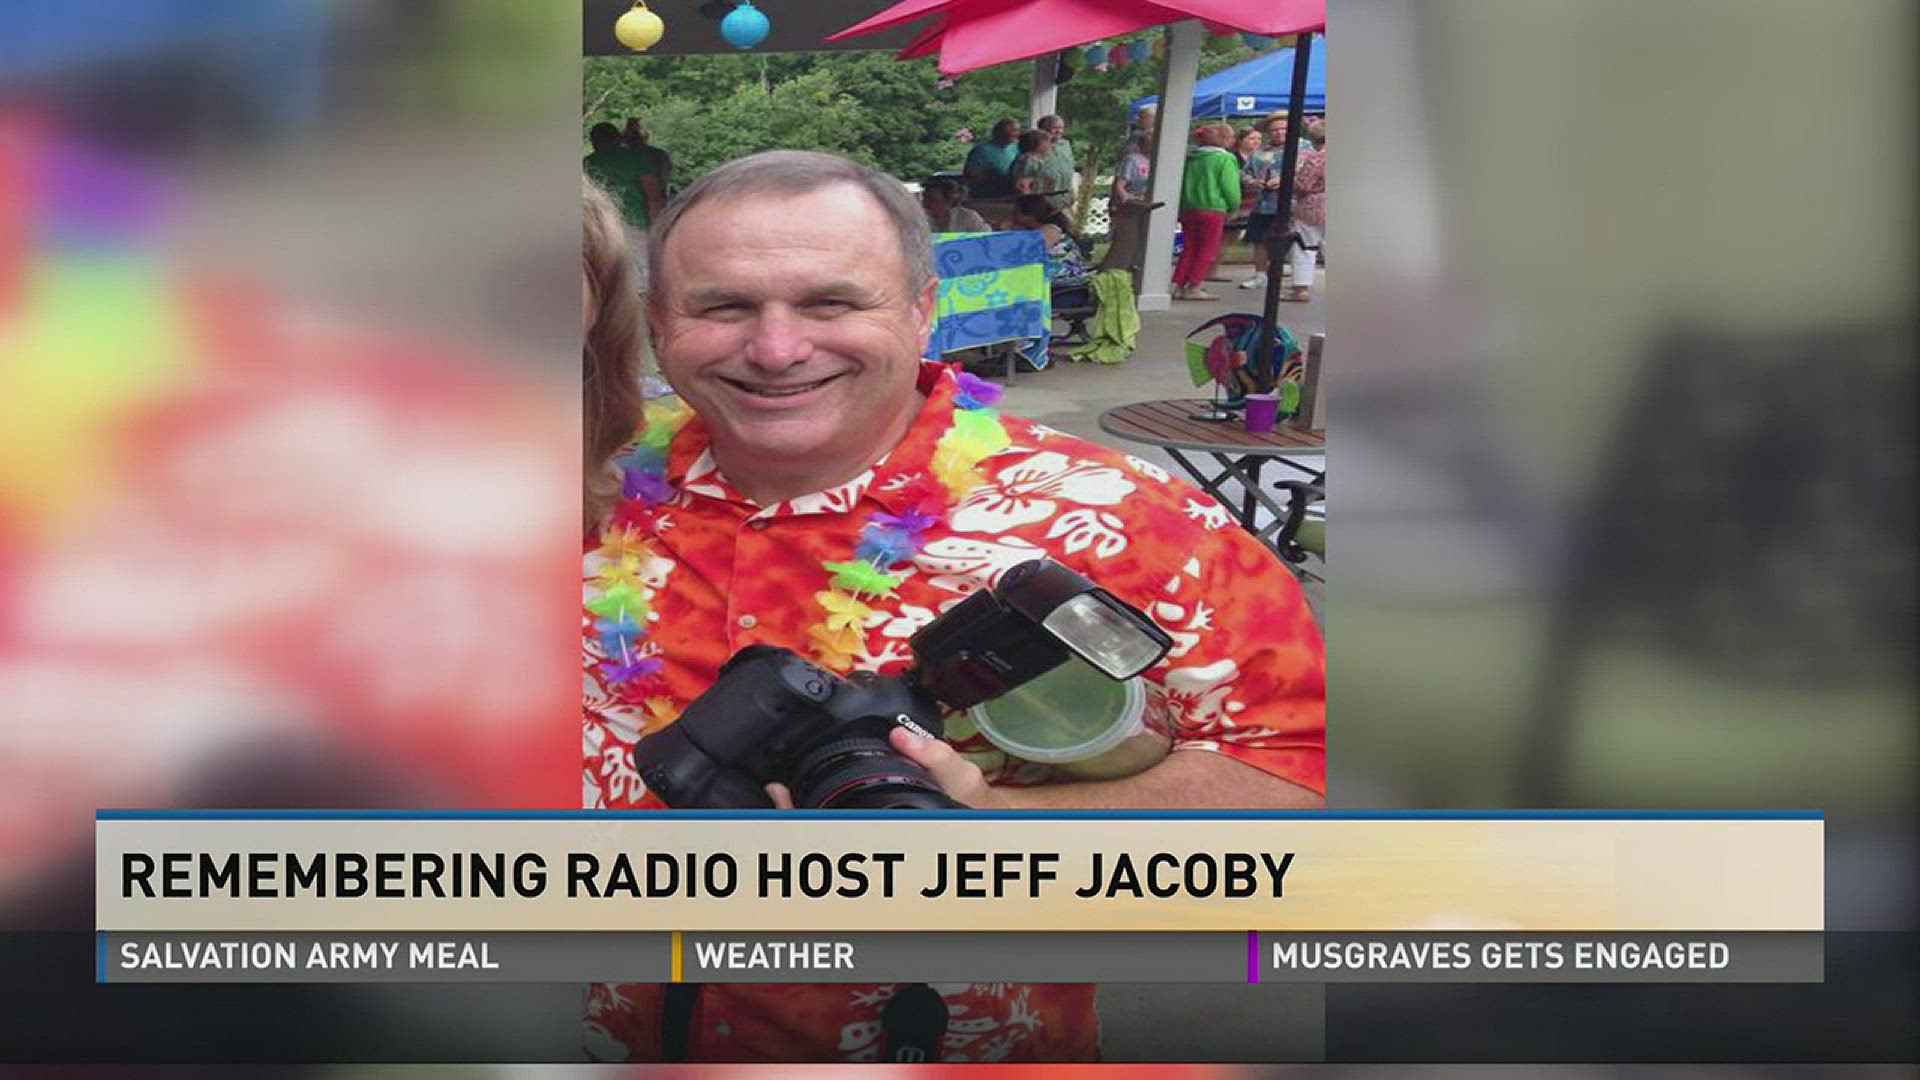 Longtime Knoxville Radio Personality Jeff Jacoby died Sunday morning after battling cancer.